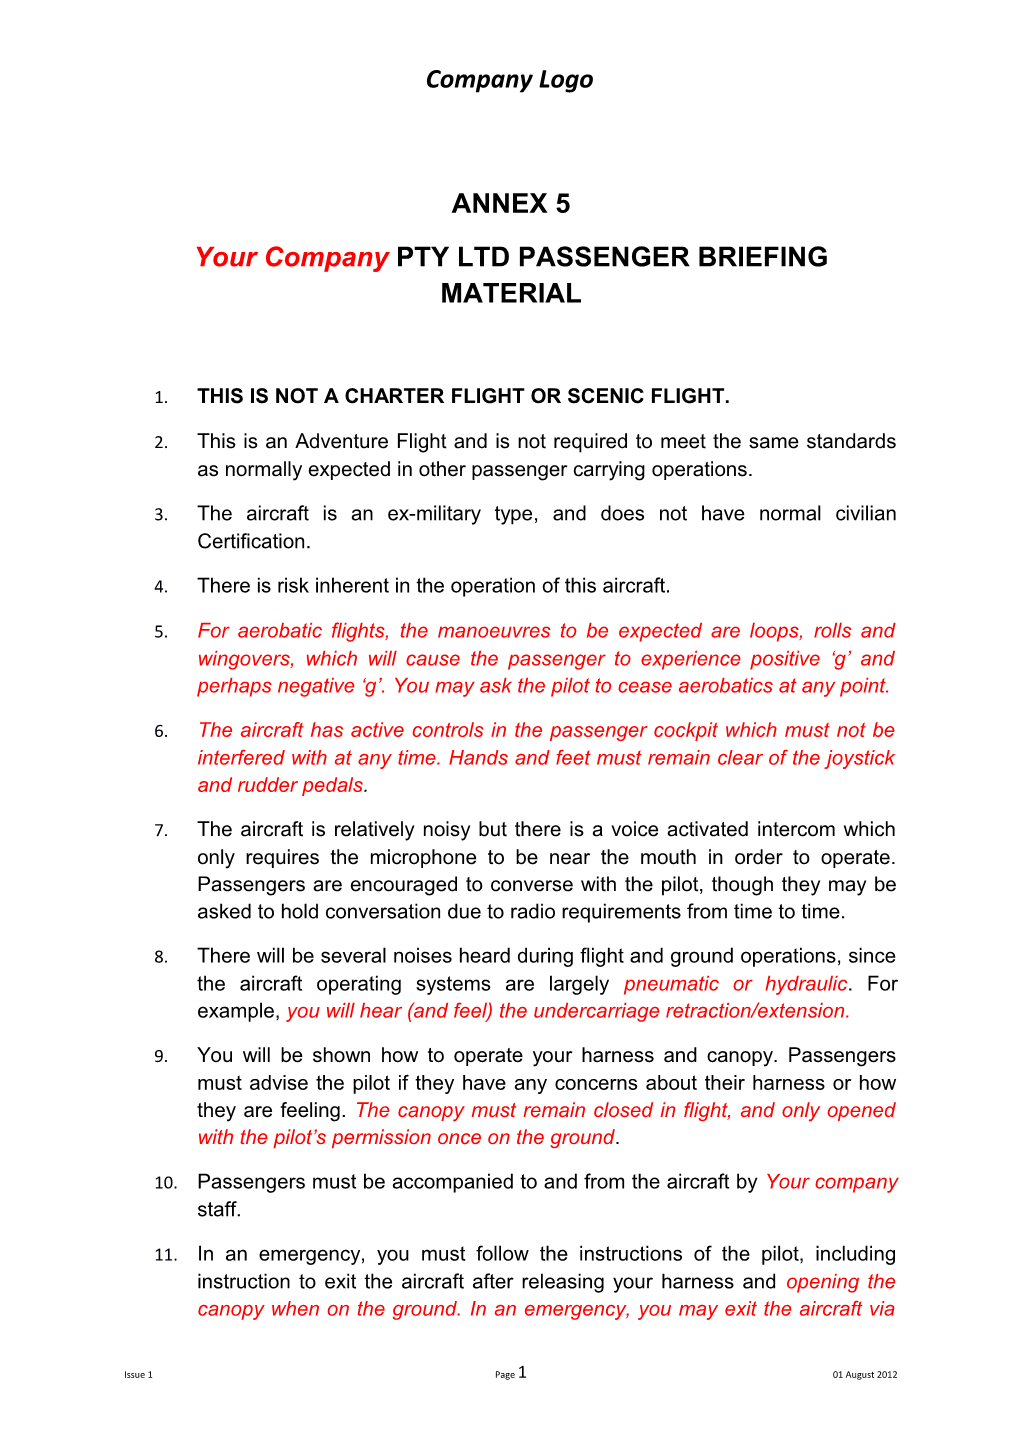 Your Company PTY LTD PASSENGER BRIEFING MATERIAL